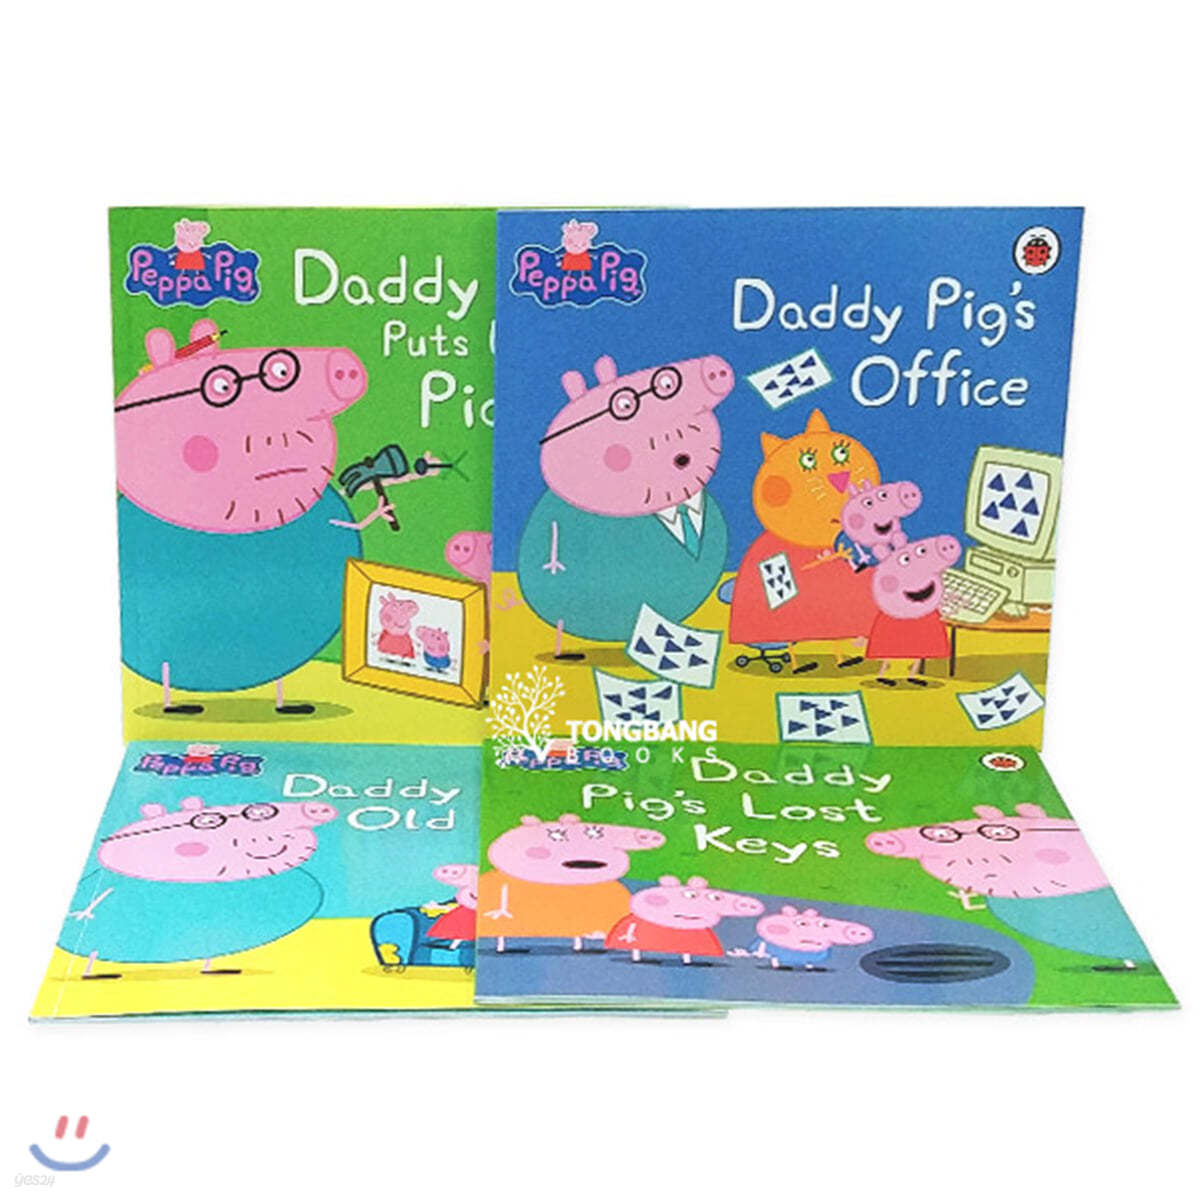 Peppa Pig : Daddy Pig Collection 페파피그 콜렉션 (4 Books Set )